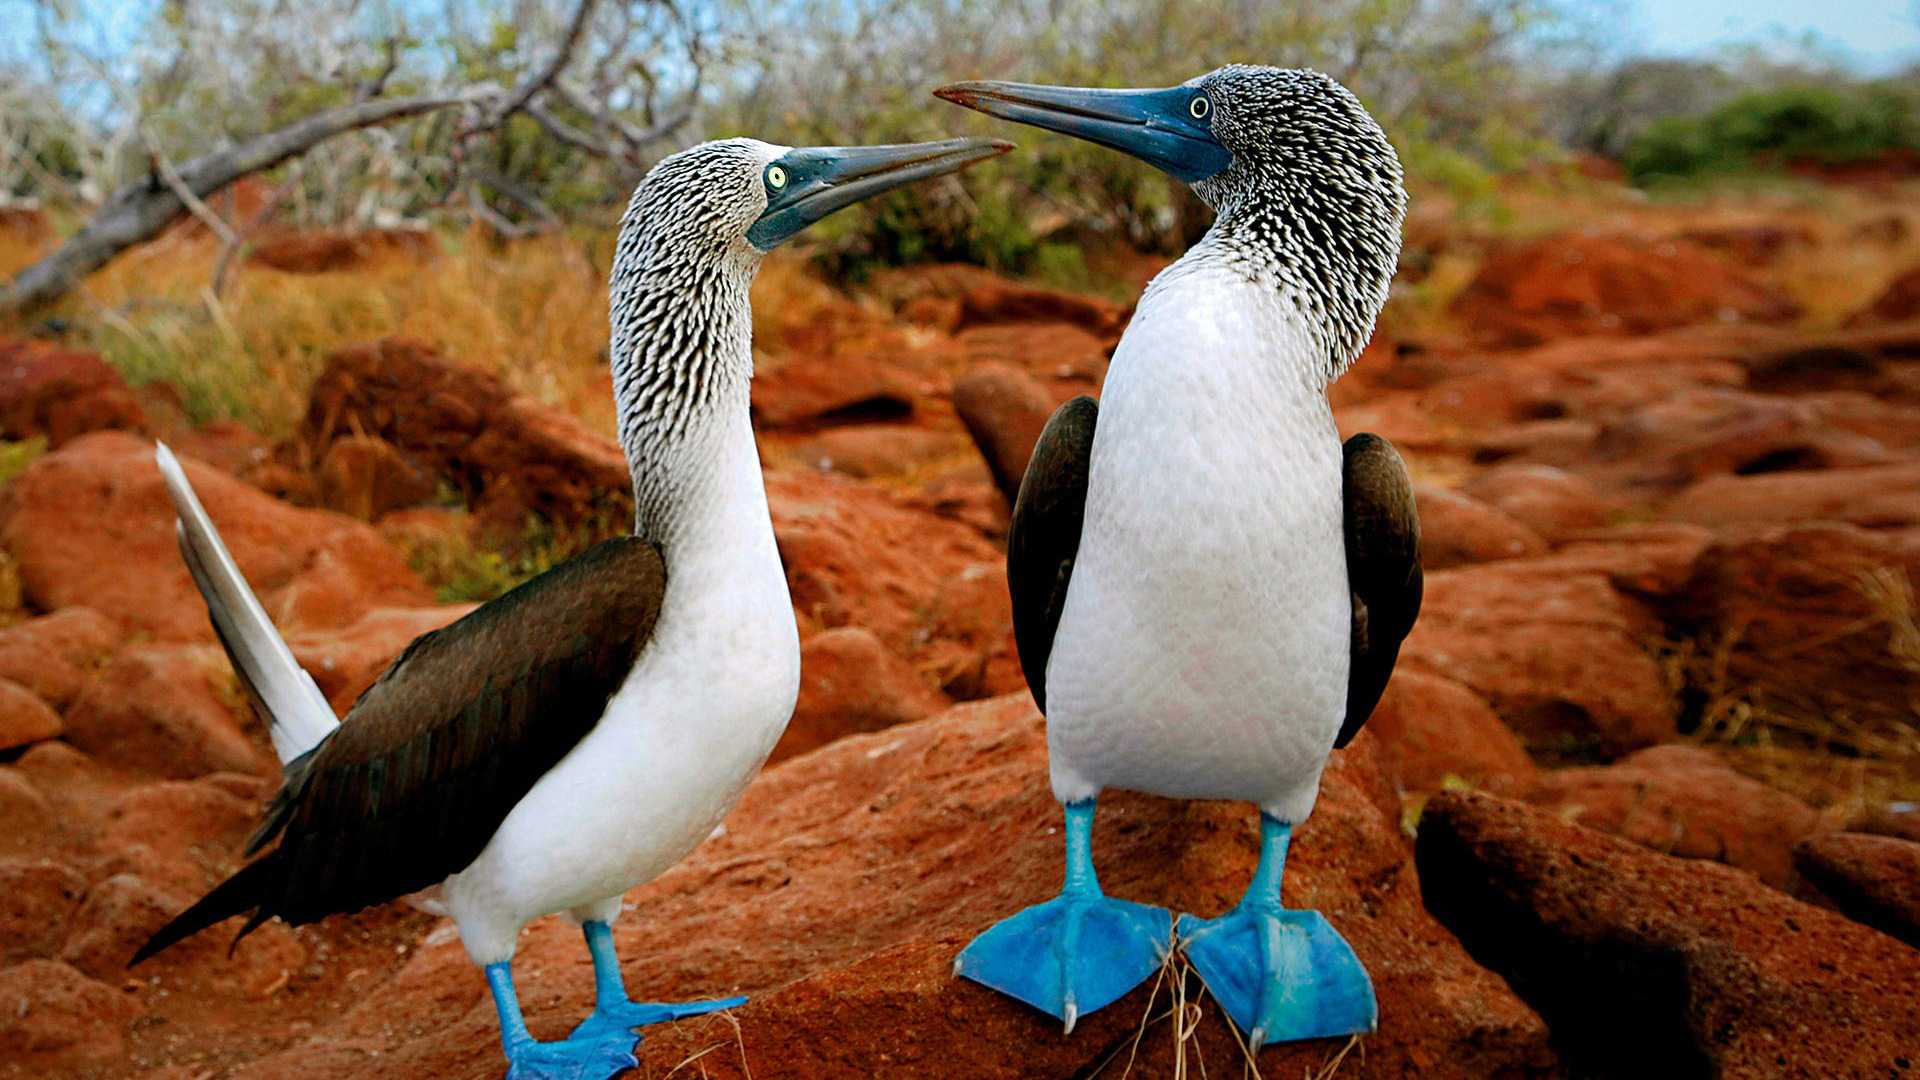 Two White Black Birds With Sharp Beaks And Blue Legs Are Standing On Red Rock Stones 2K Birds